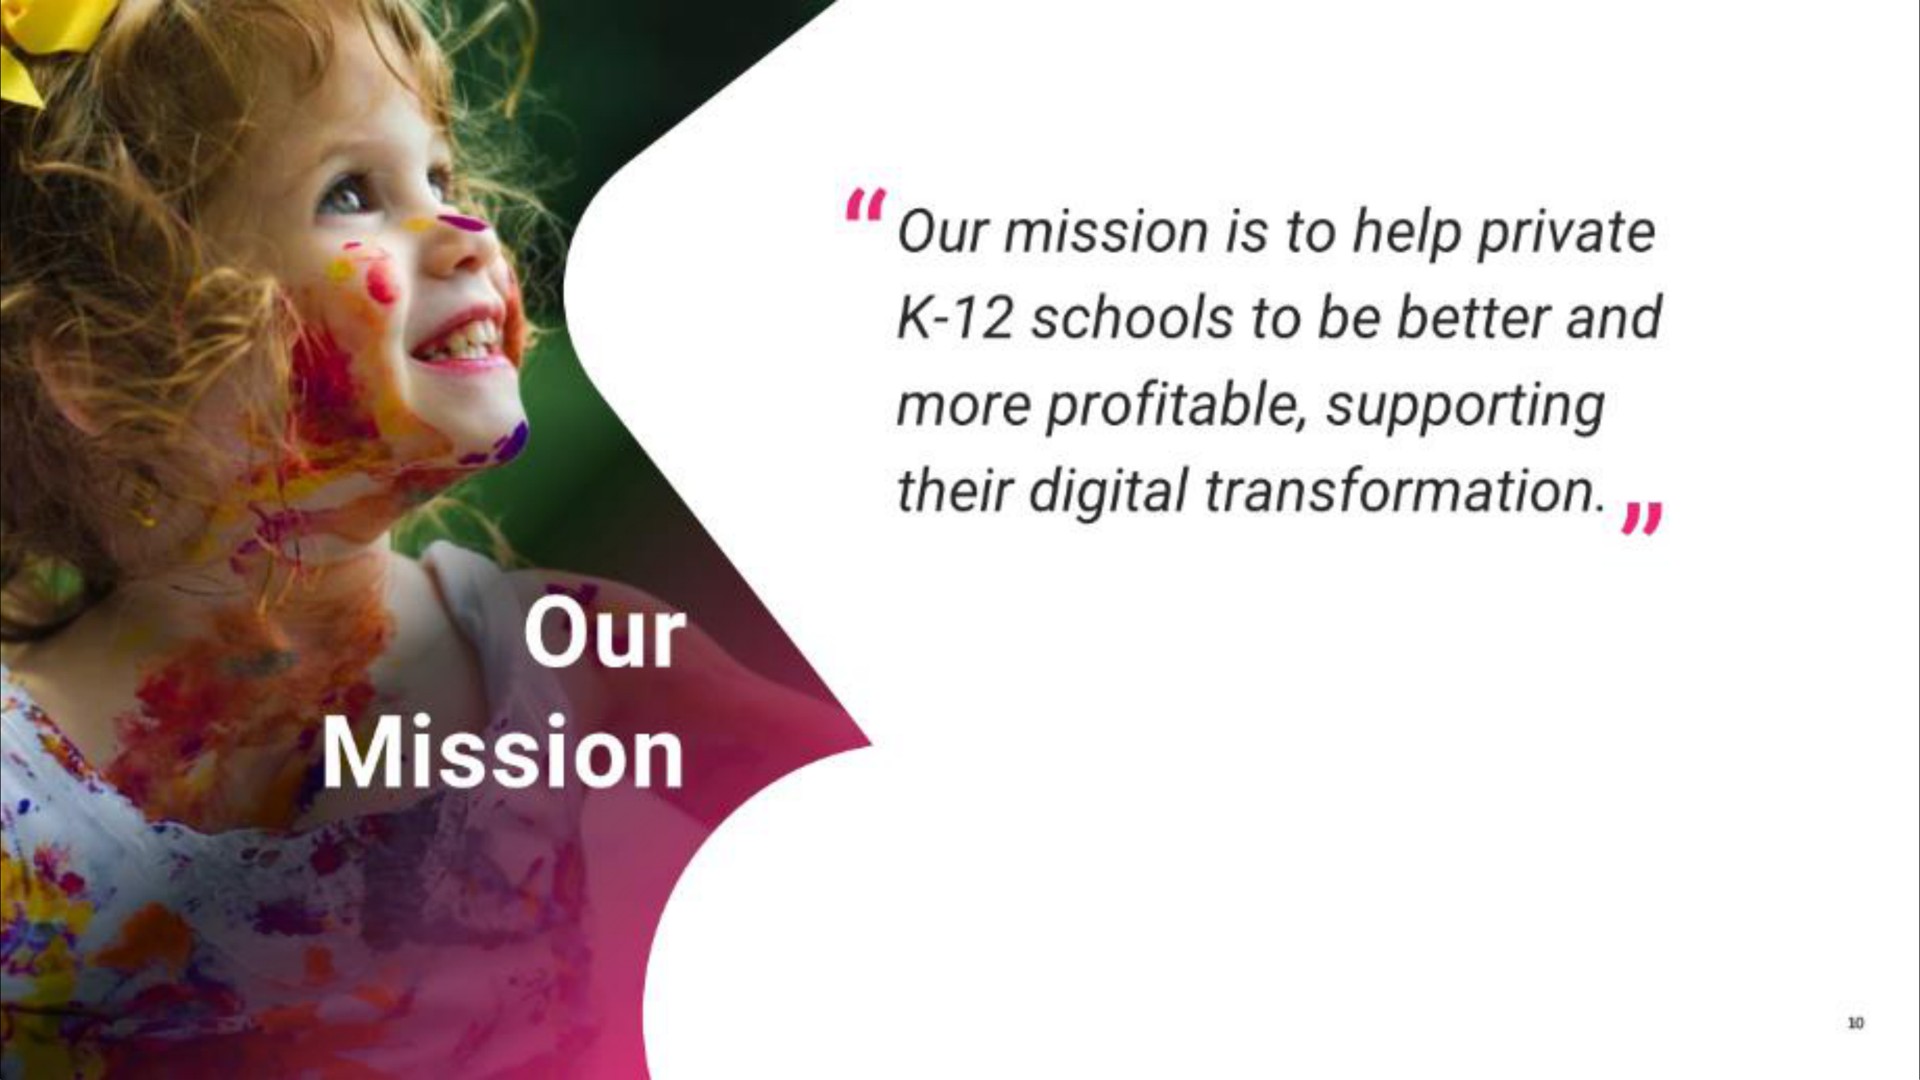 our mission is to help private schools to be better and more profitable supporting their digital transformation our mission | Vasta Platform